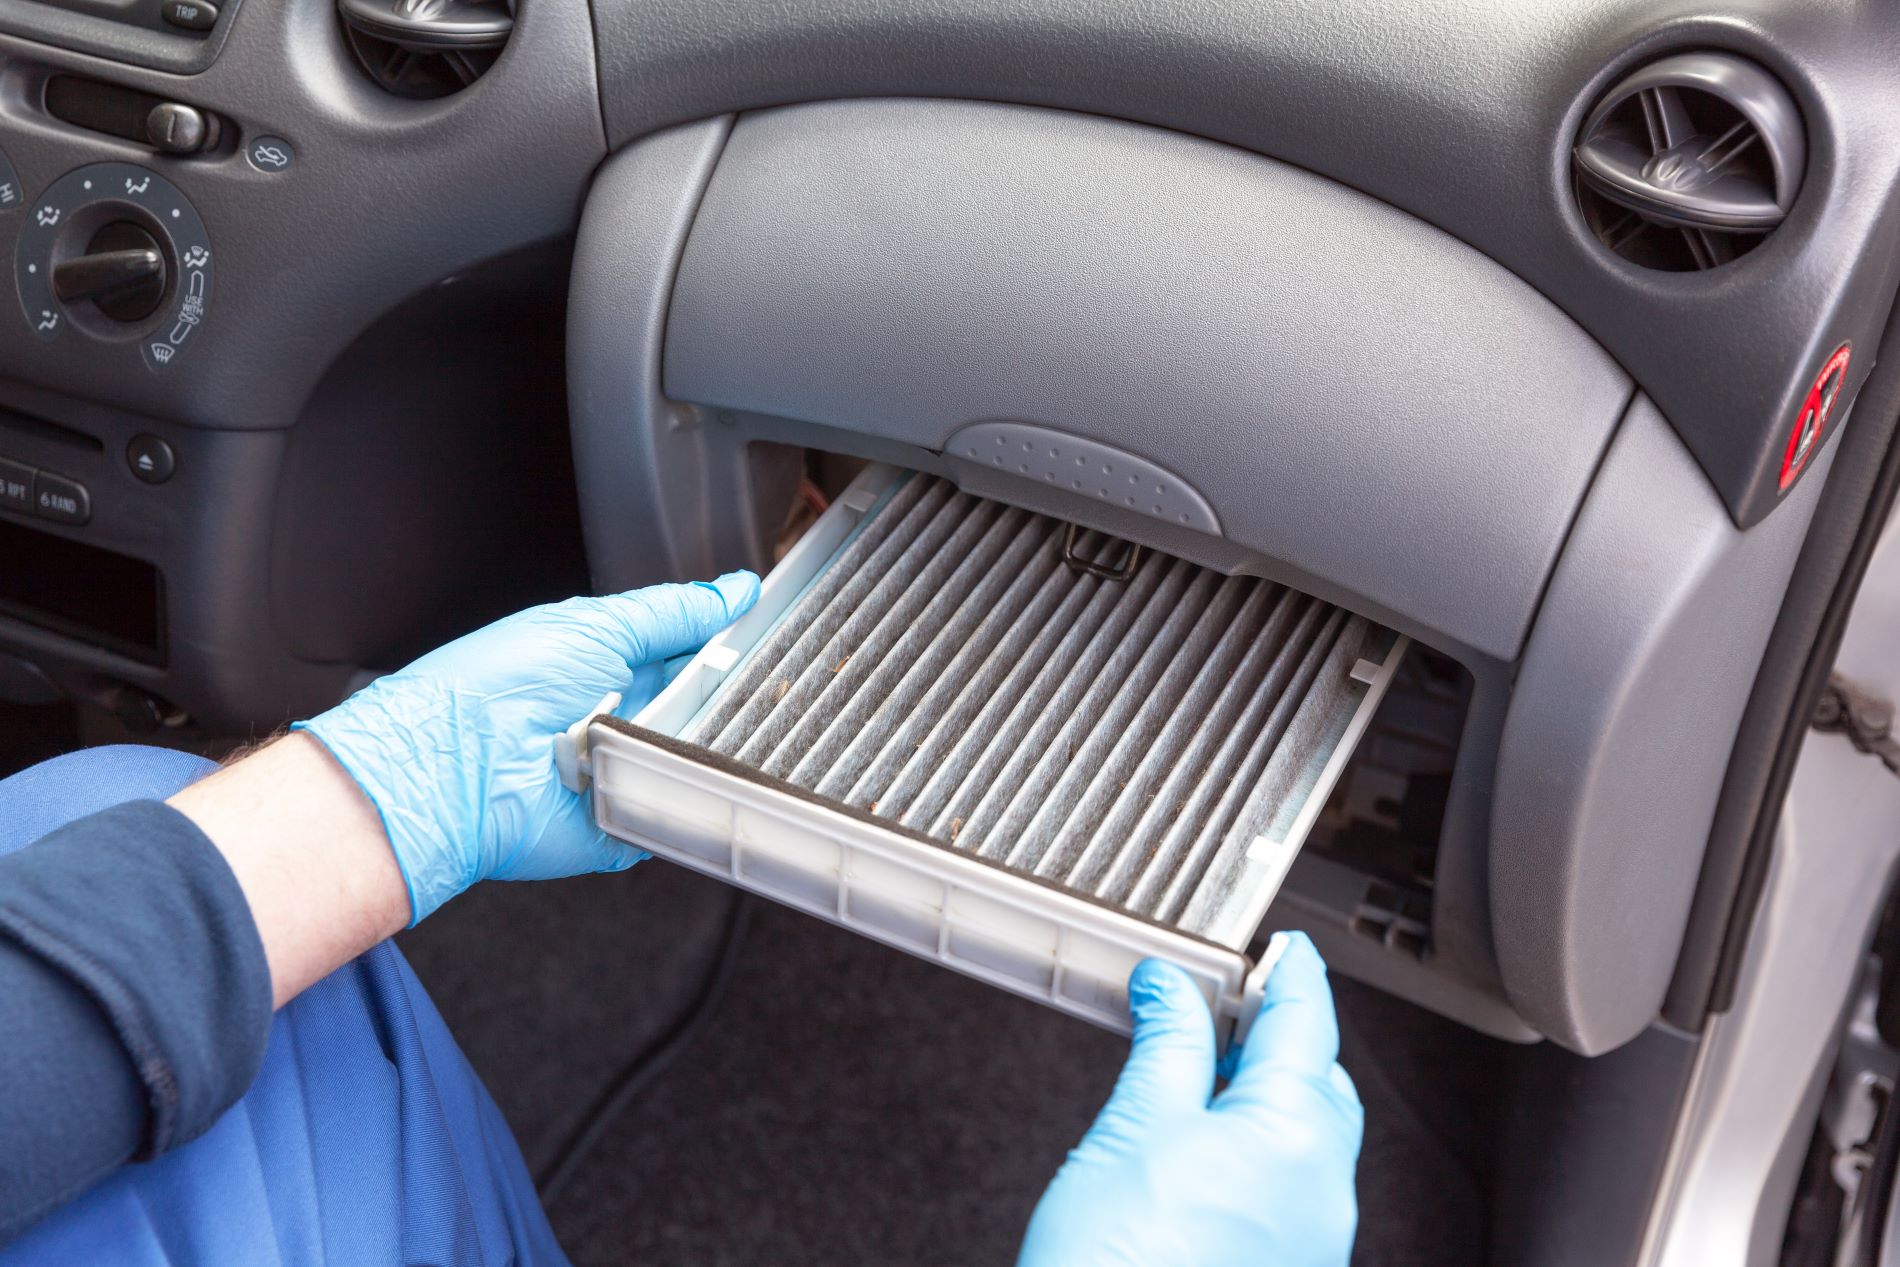 What Happens When You Don't Change Your Cabin Car Air Filter?